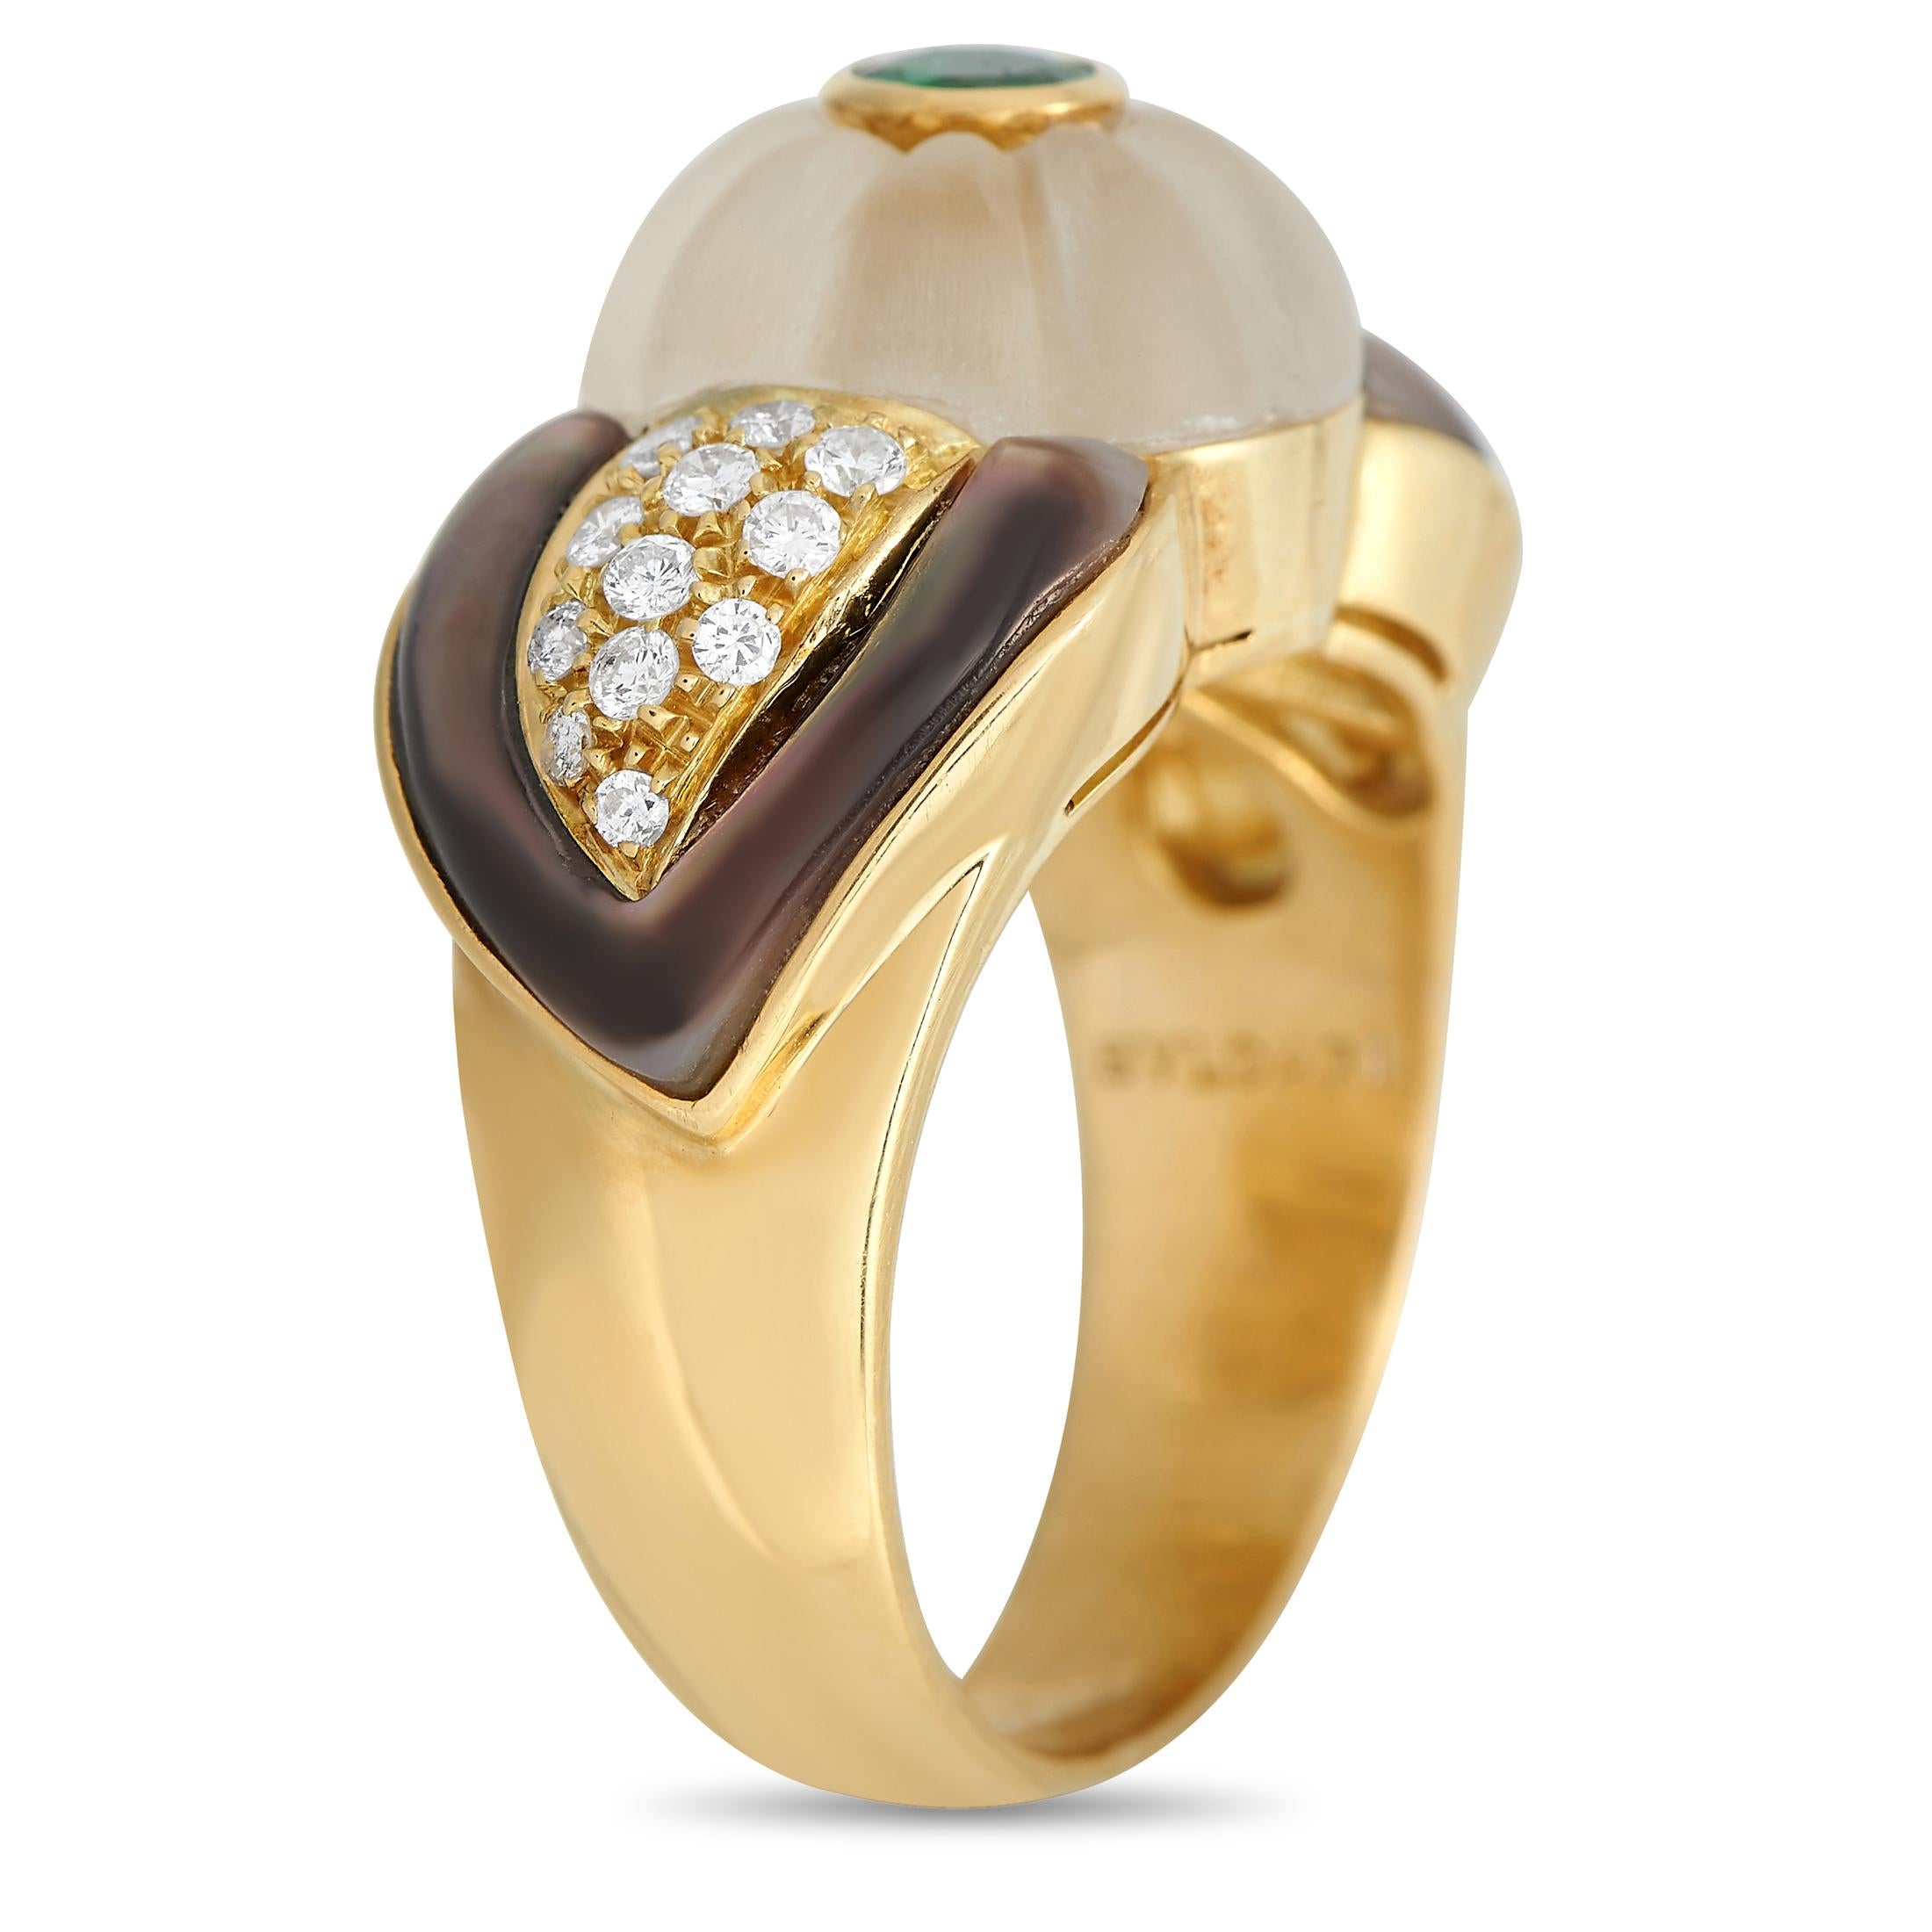 Accessorizing with this ring is an easy way to add a bold twist to your looks. This lovely Bvlgari piece features a wide and smooth yellow gold shank with a domed rock crystal center topped with a medium-green round-cut emerald gemstone. The